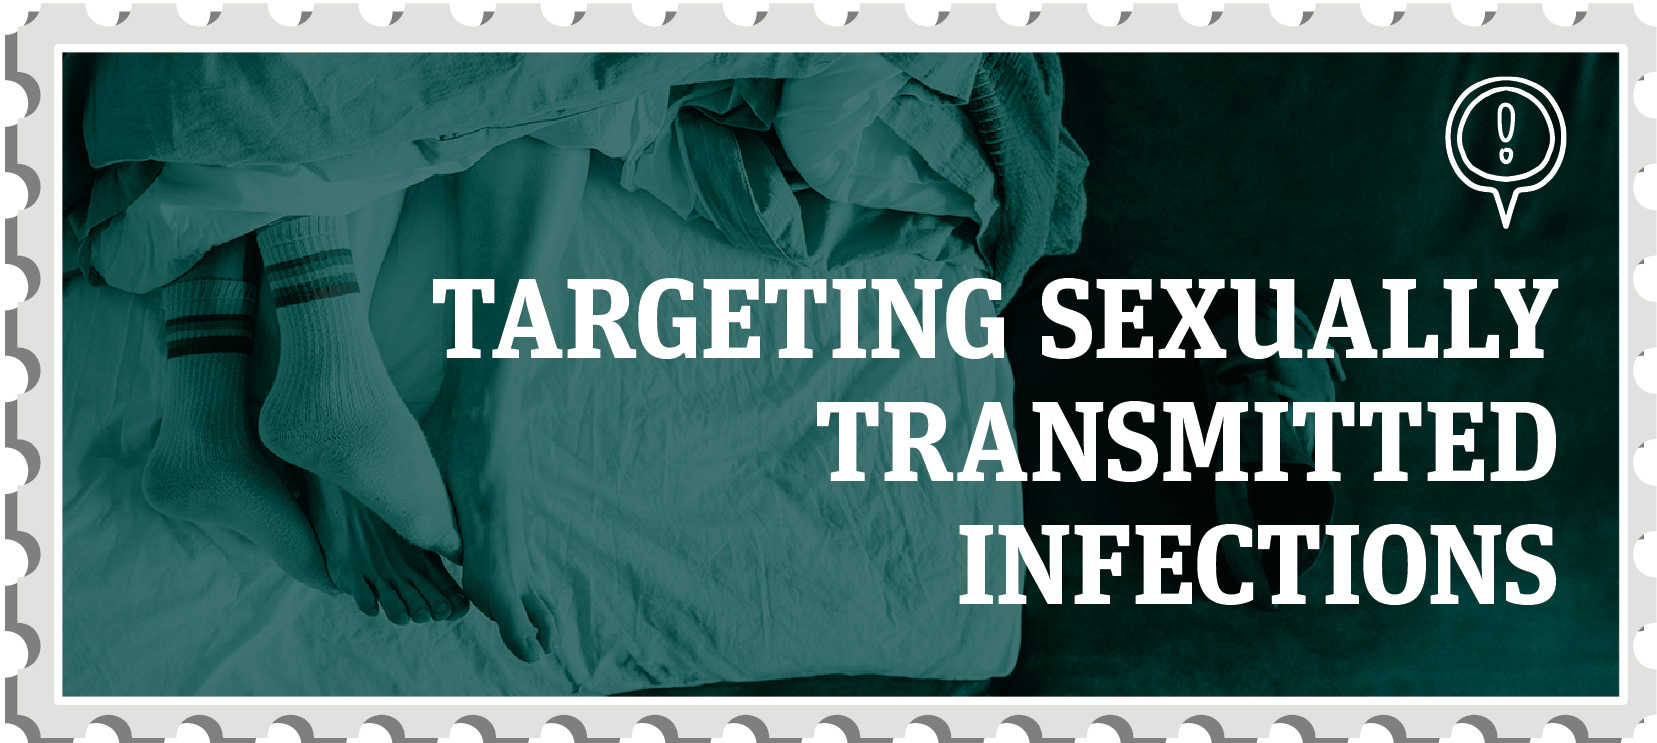 Targeting sexually transmitted infections